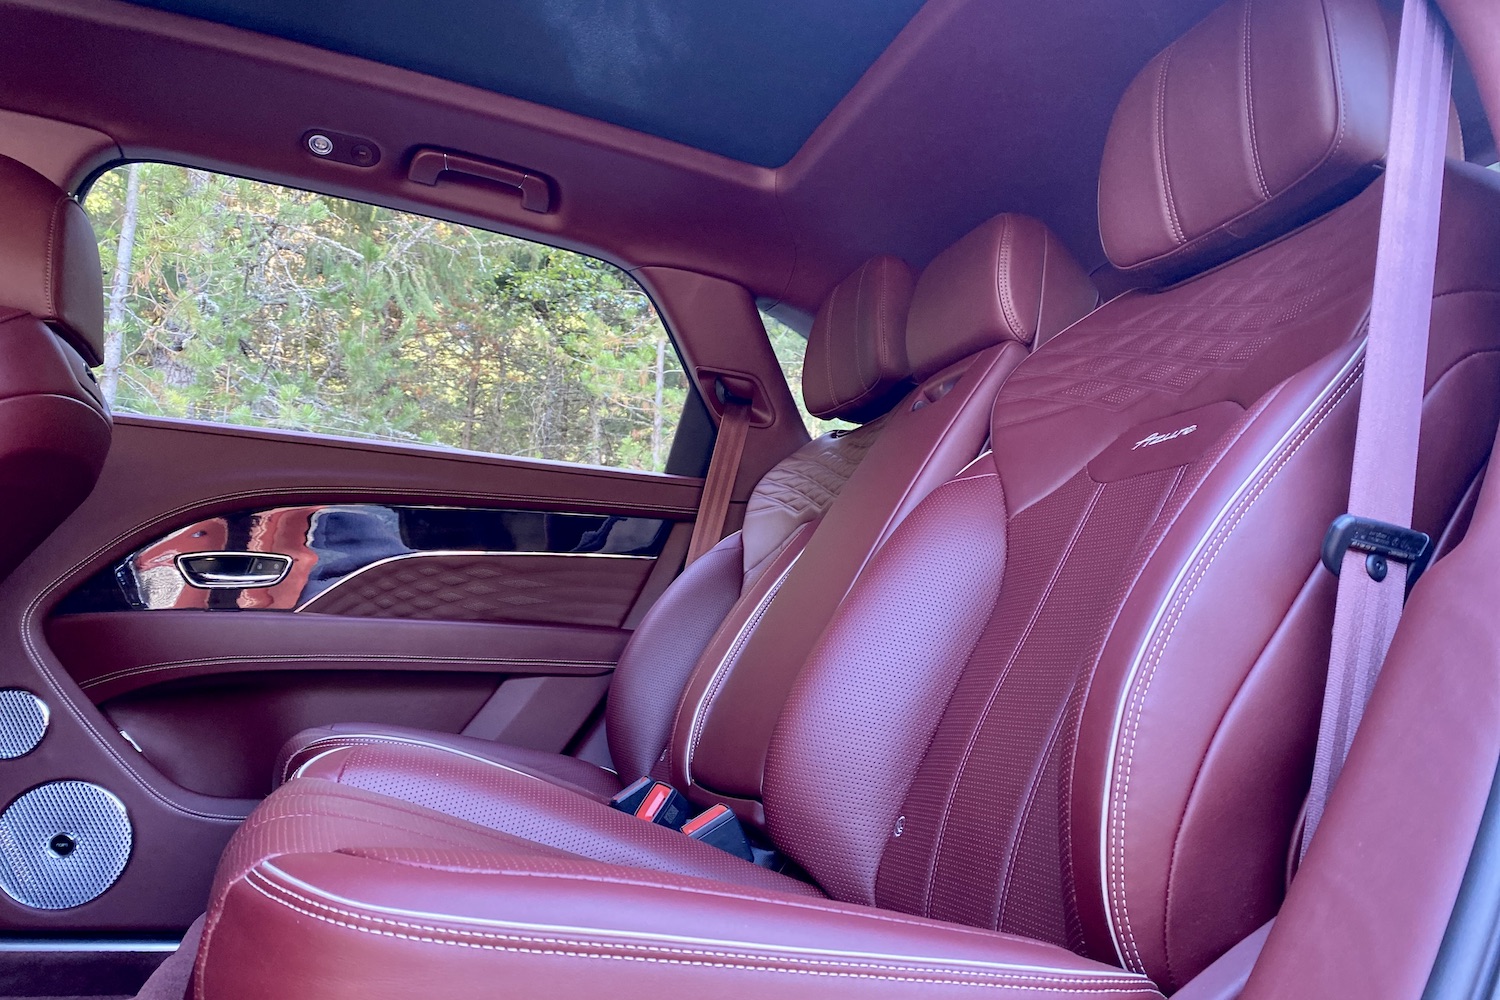 Rear seats in 2023 Bentley Bentayga EWB from driver's side outside the SUV.